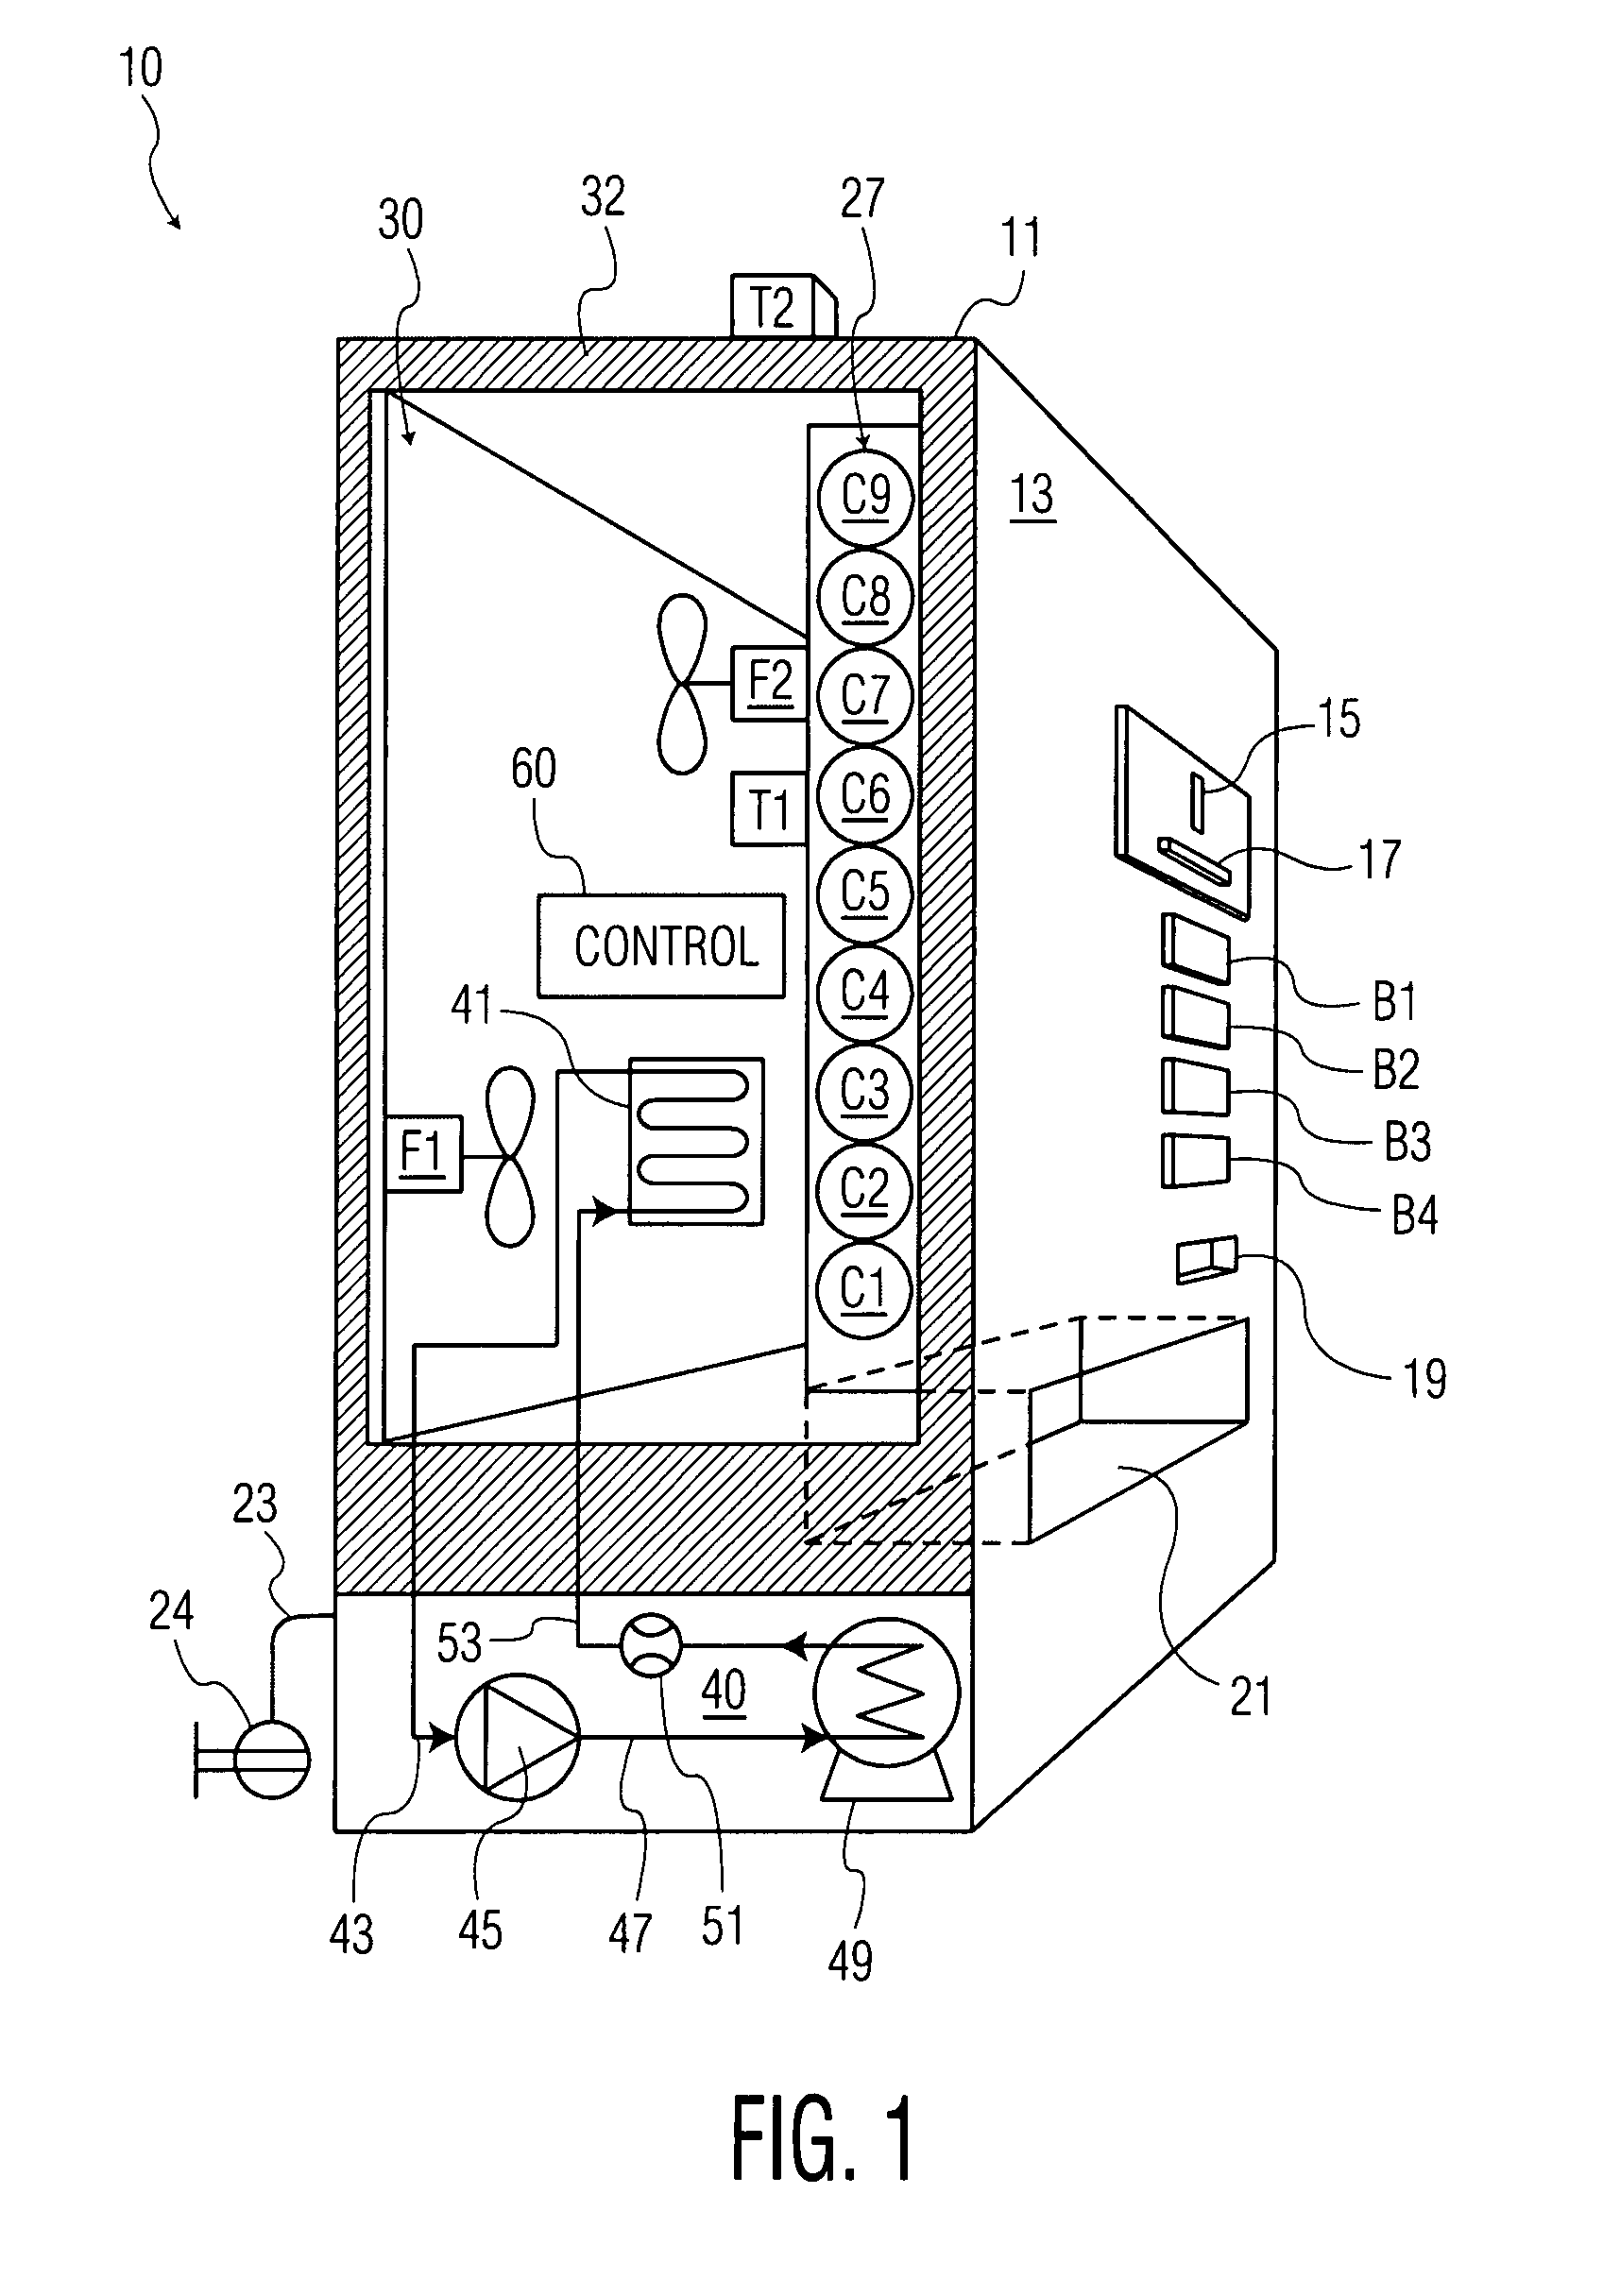 Method and apparatus for conserving power consumed by a refrigerated appliance utilizing audio signal detection